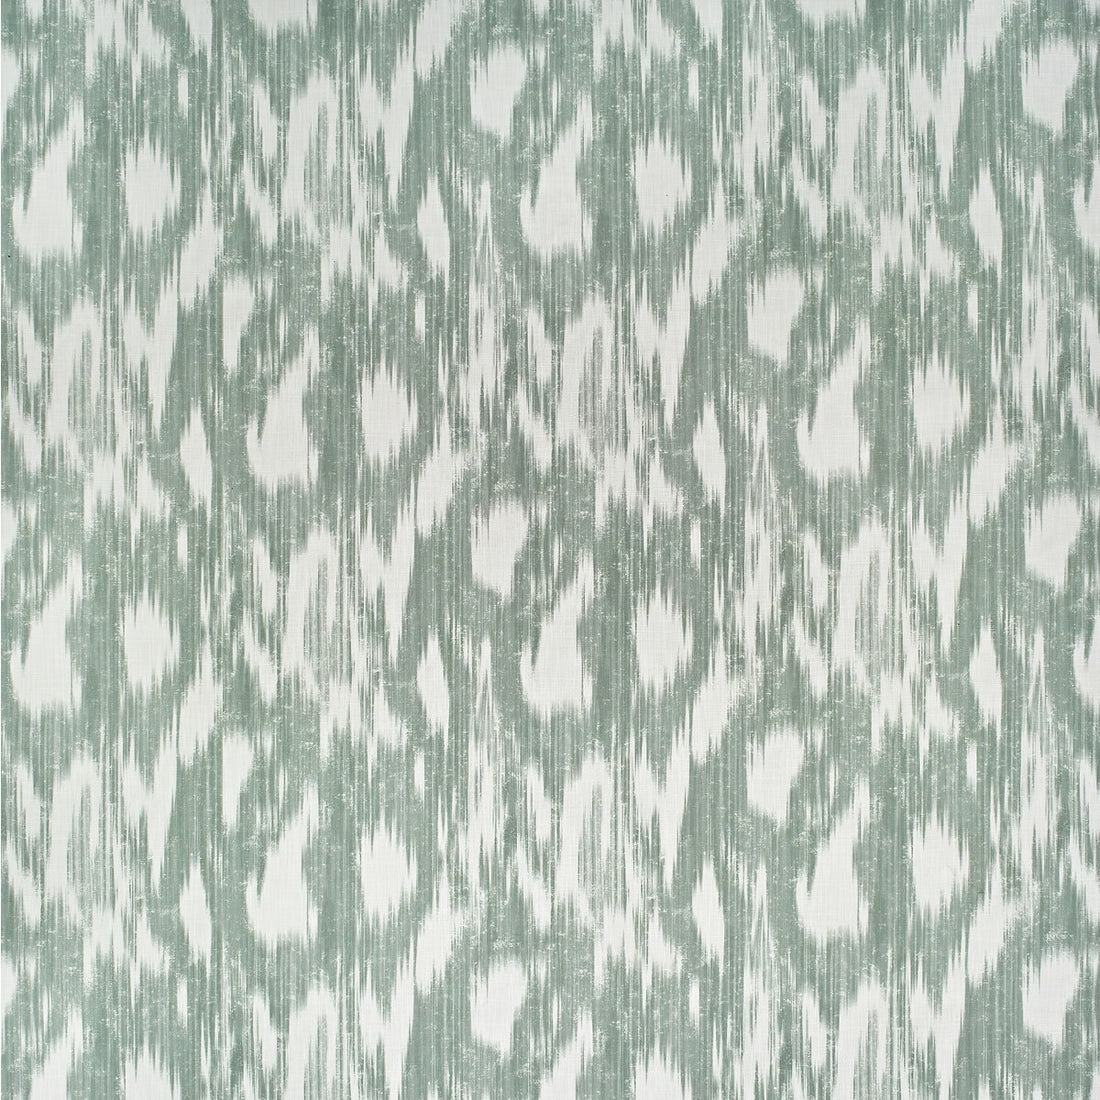 Apulia Outdoor fabric in celadon color - pattern AM100385.315.0 - by Kravet Couture in the Andrew Martin Sophie Patterson Outdoor collection